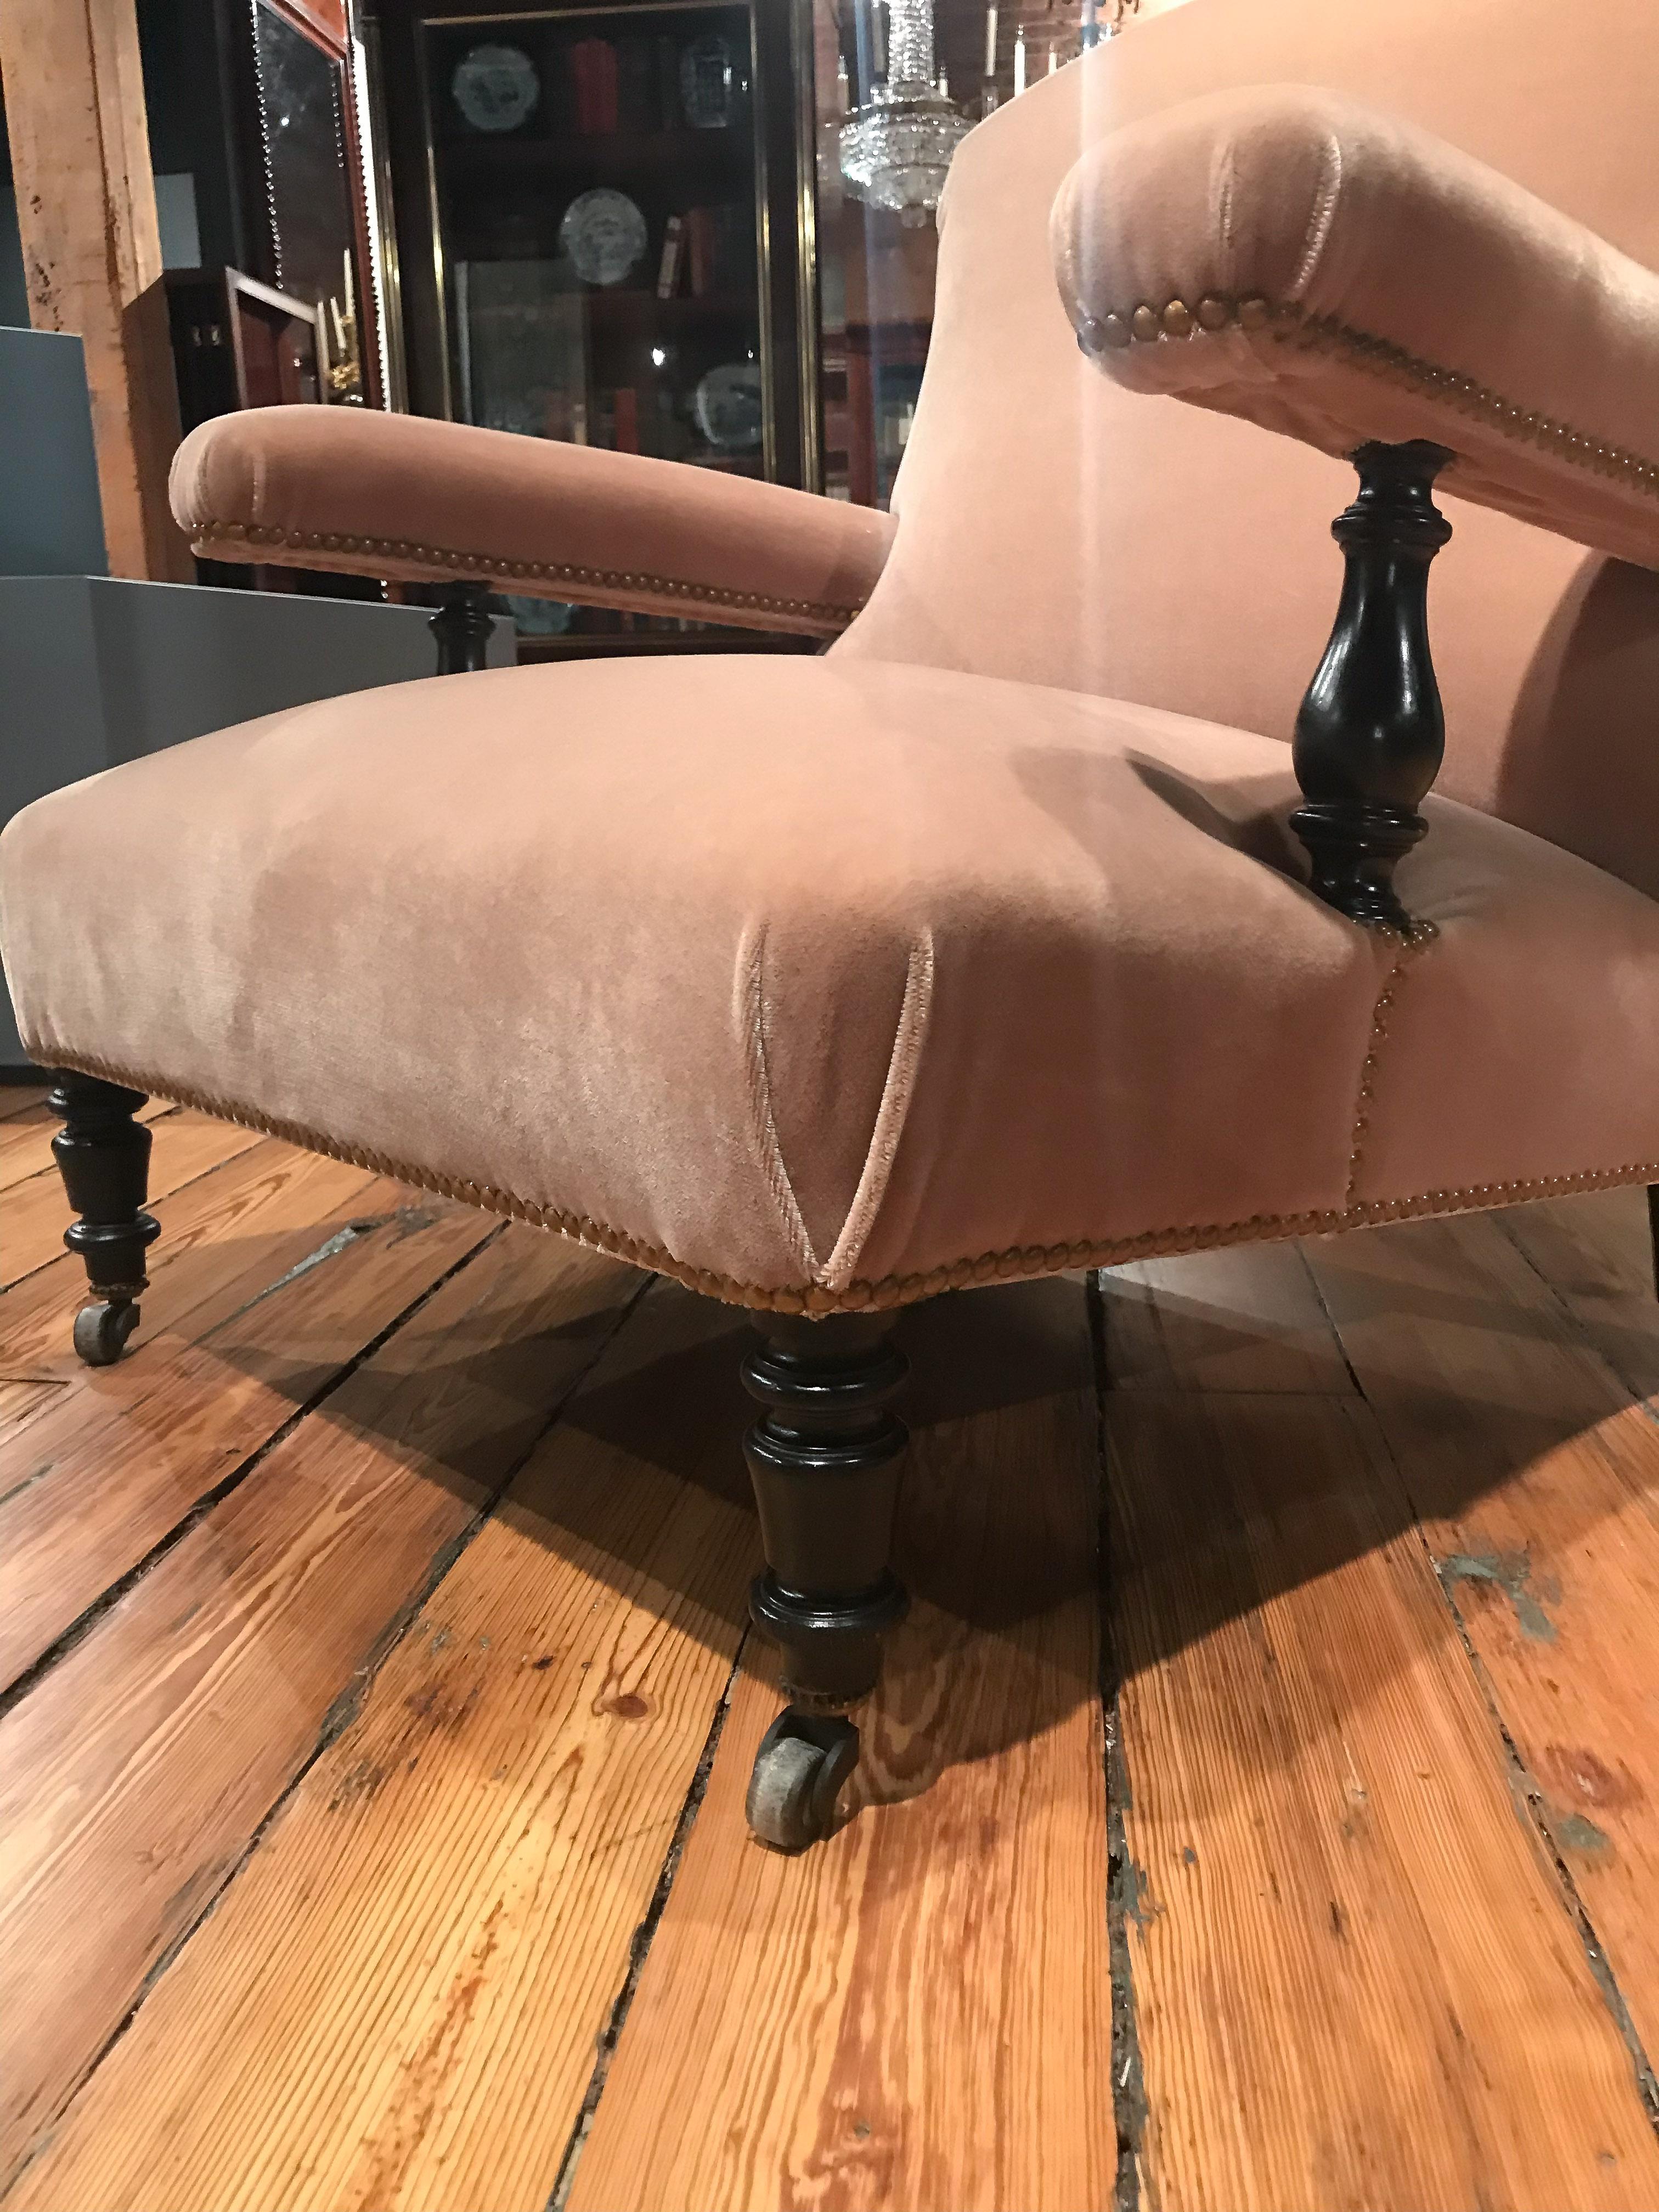 Pair of Napoleon III library chairs with upholstered arms. These chairs have been restored with the exposed frame being ebonized and upholstery done in a rich mohair velvet.